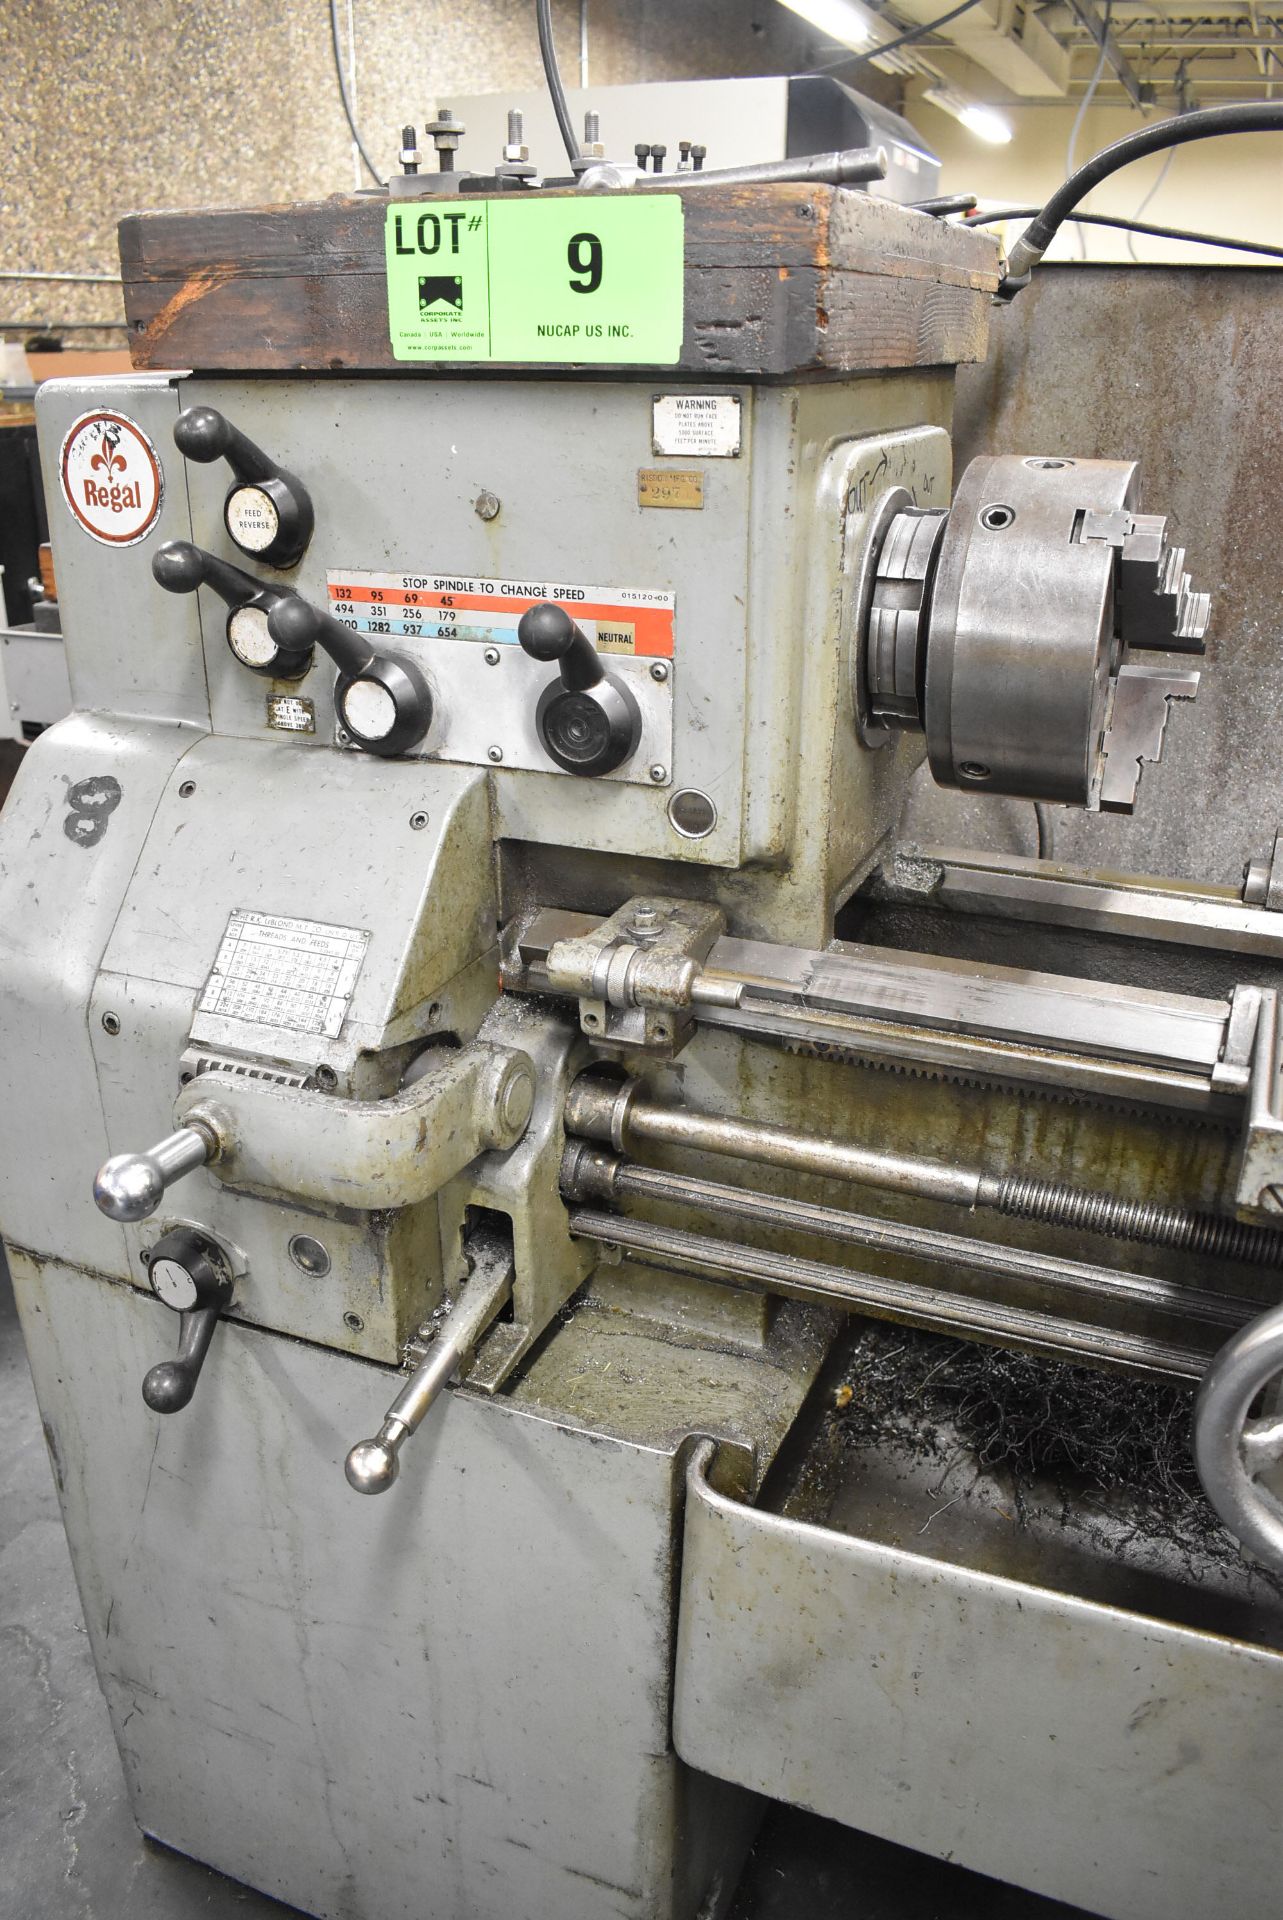 LEBLOND REGAL 16X30 ENGINE LATHE WITH 16" SWING OVER BED, 30" DISTANCE BETWEEN CENTERS, 1.5" SPINDLE - Image 2 of 10